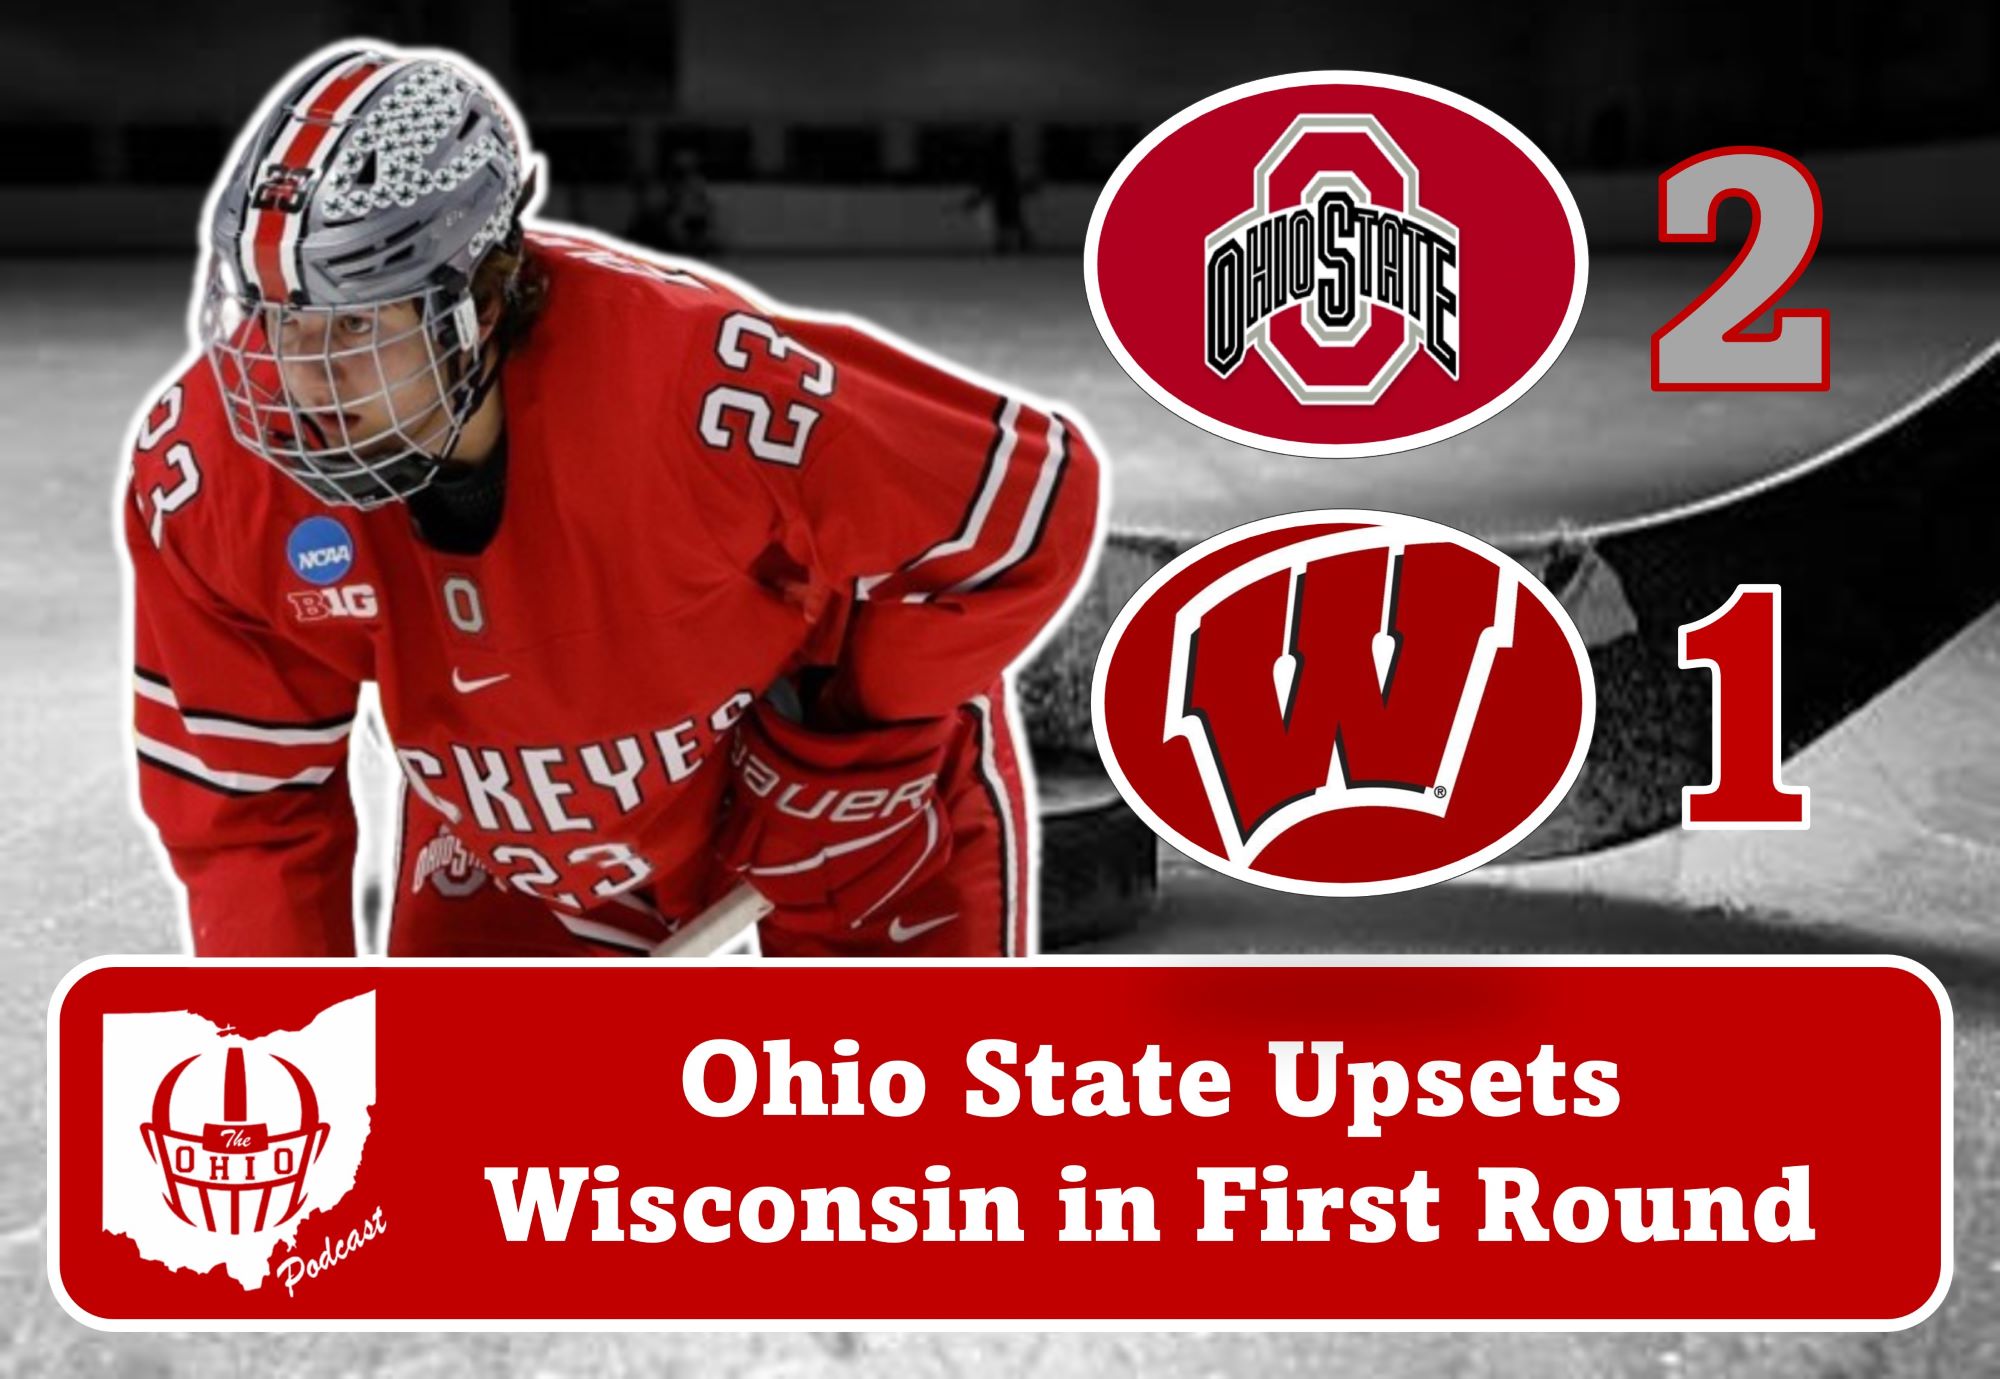 Ohio State Upsets Wisconsin in First Round.